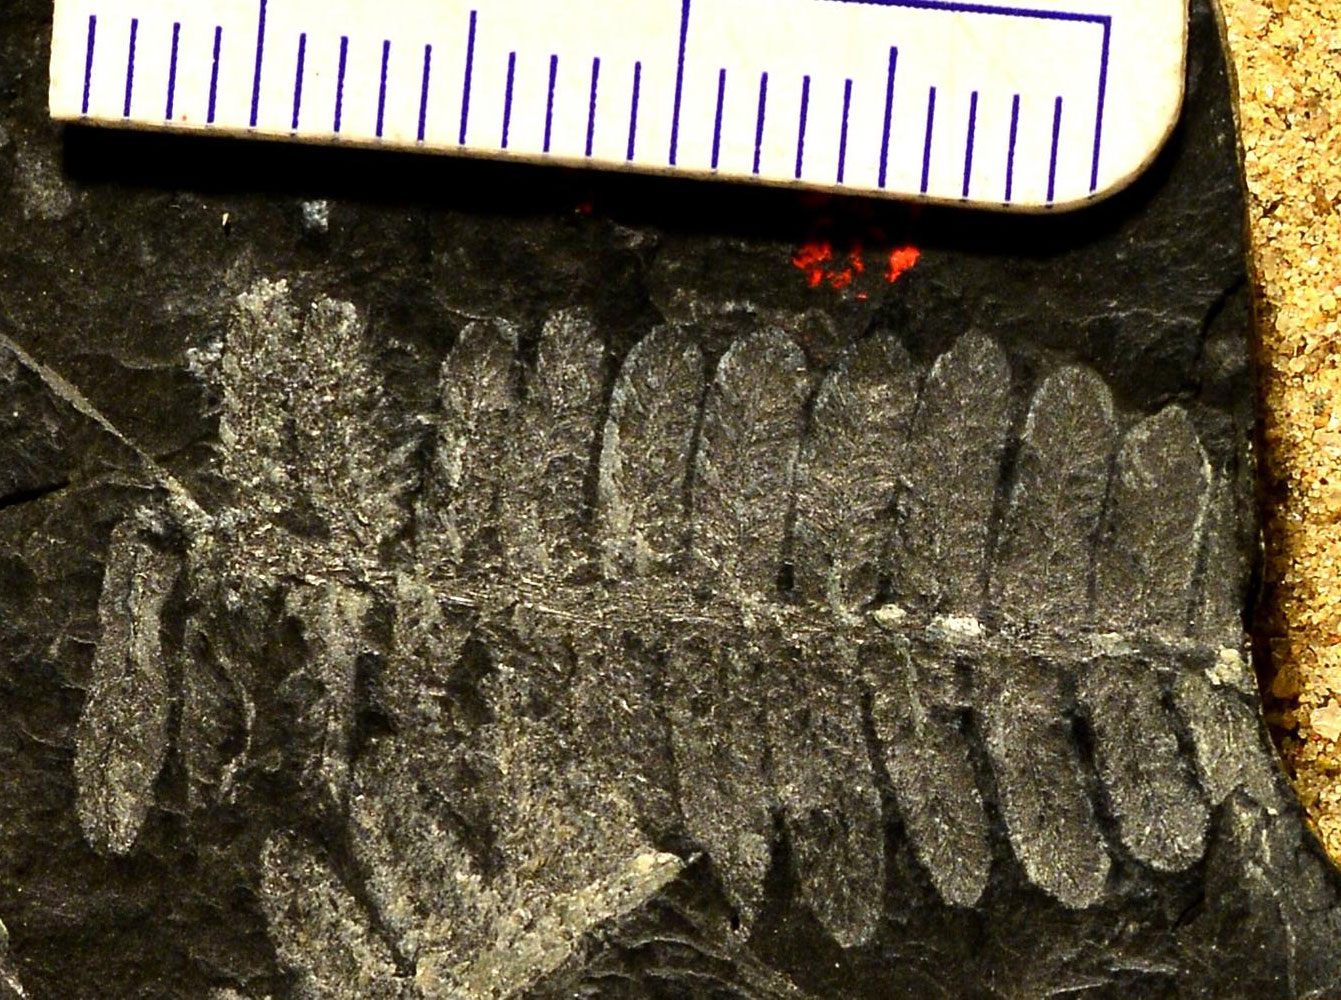 Photograph of the seed fern Pecopteris from the Carboniferous of Rhode Island. The photo shows a portion of a white, fern-like leaf preserved on a black rock.